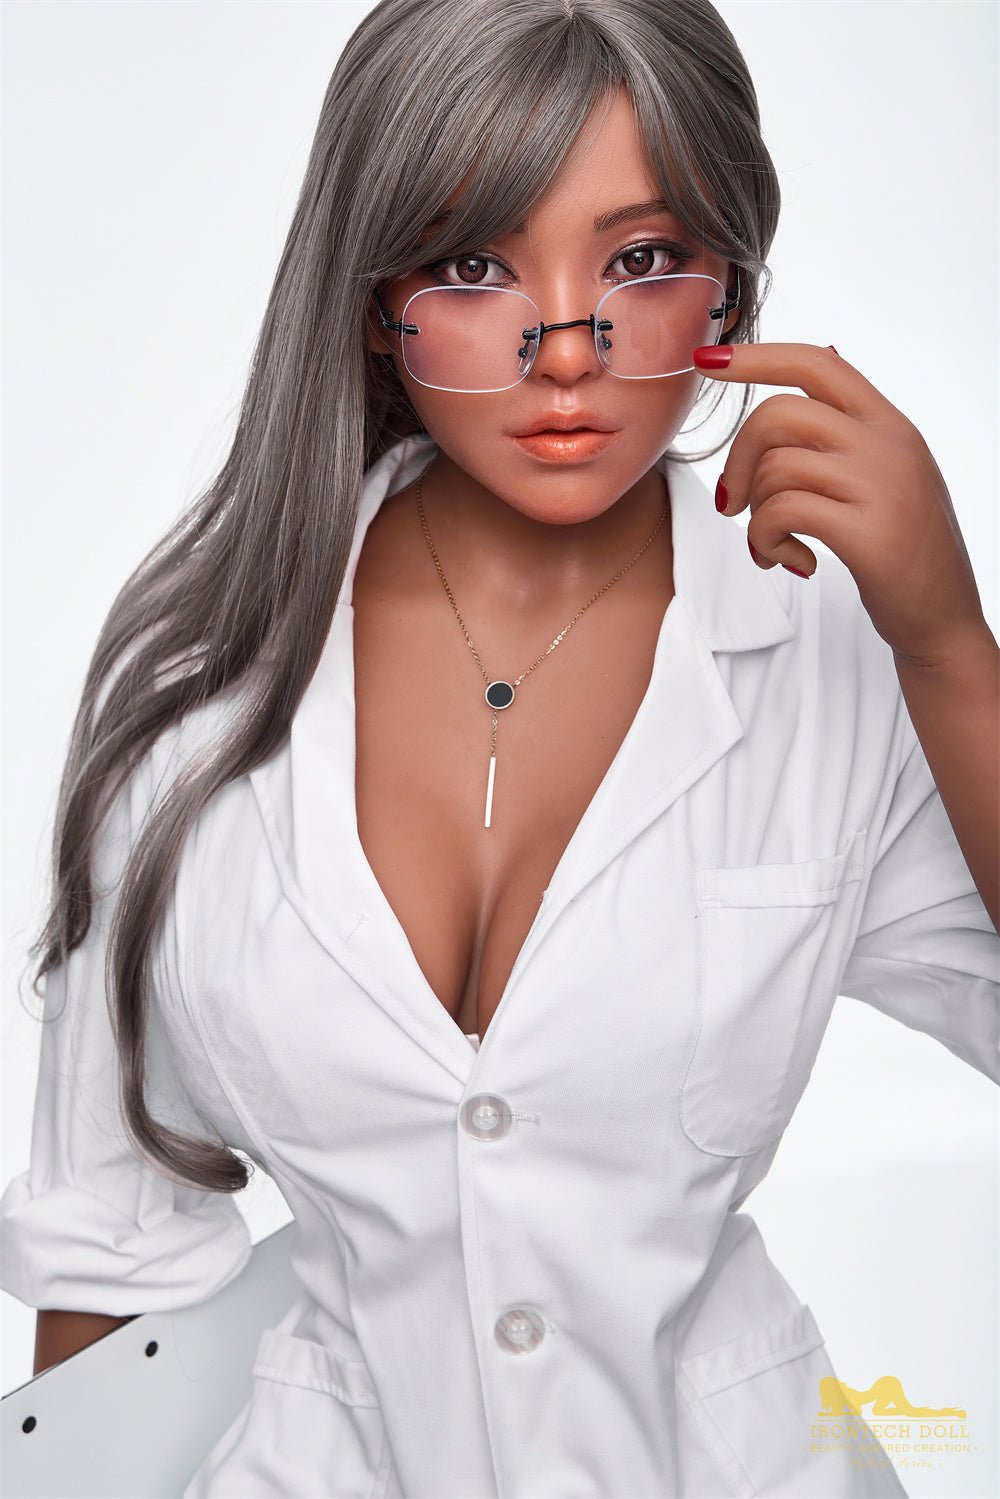 164cm/5ft5 G-Cup Dark Tanned Beautiful Sex Doll with 